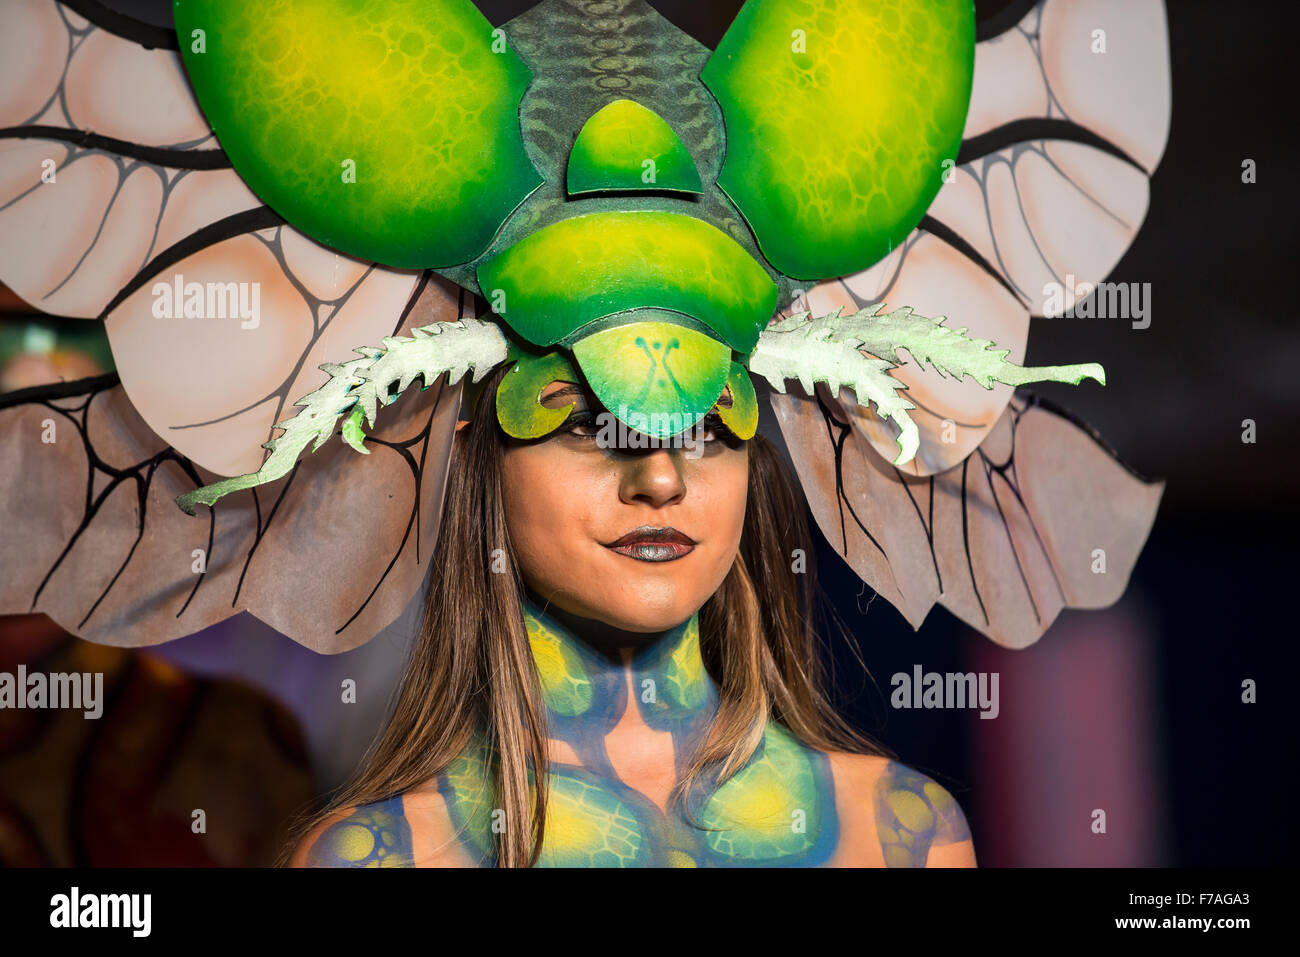 Model in body paint fashion hires stock photography and images Alamy